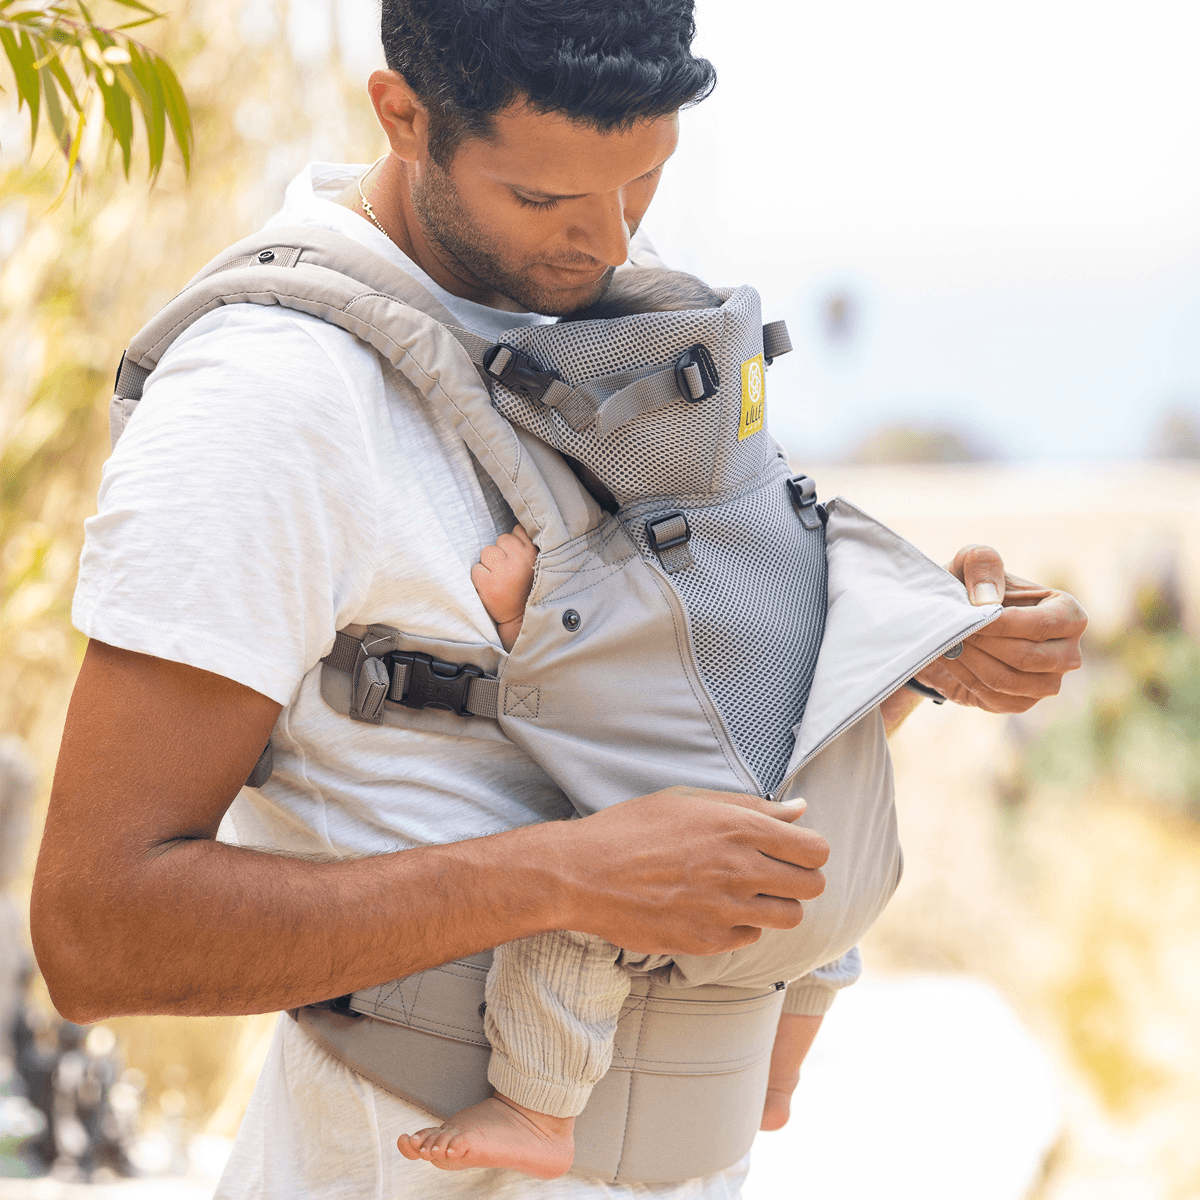 babywearing, lillebaby complete all seasons, best carrier, best baby product, holiday deals, thanksgiving deals, Black Friday offers, cyber Monday